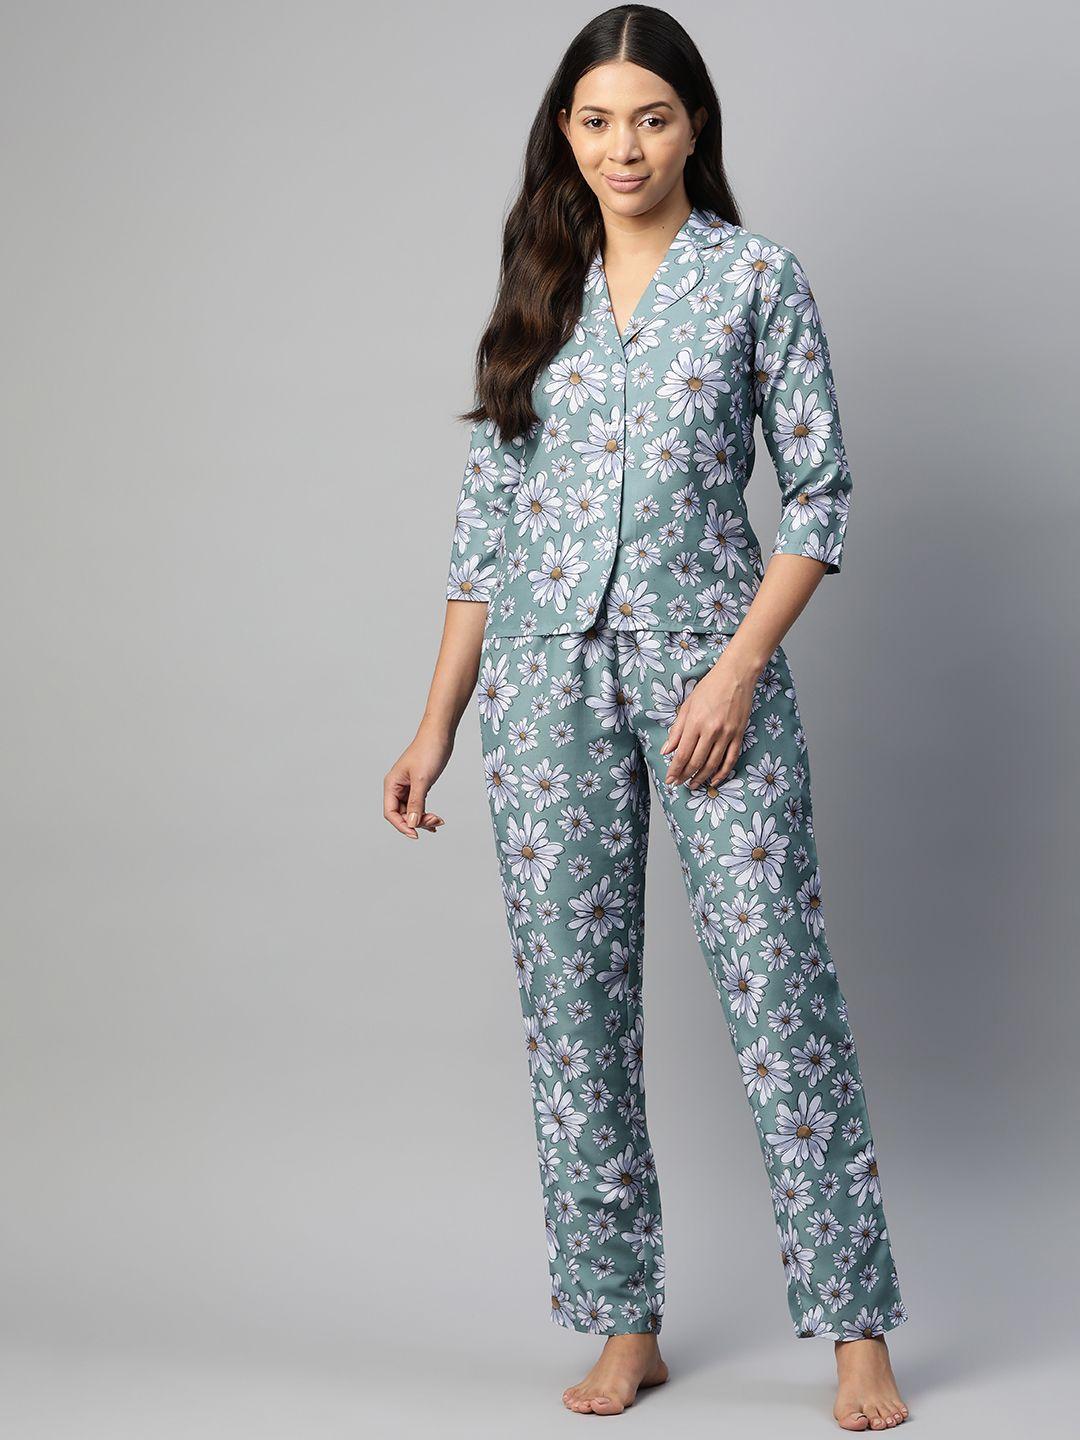 popnetic floral printed night suit